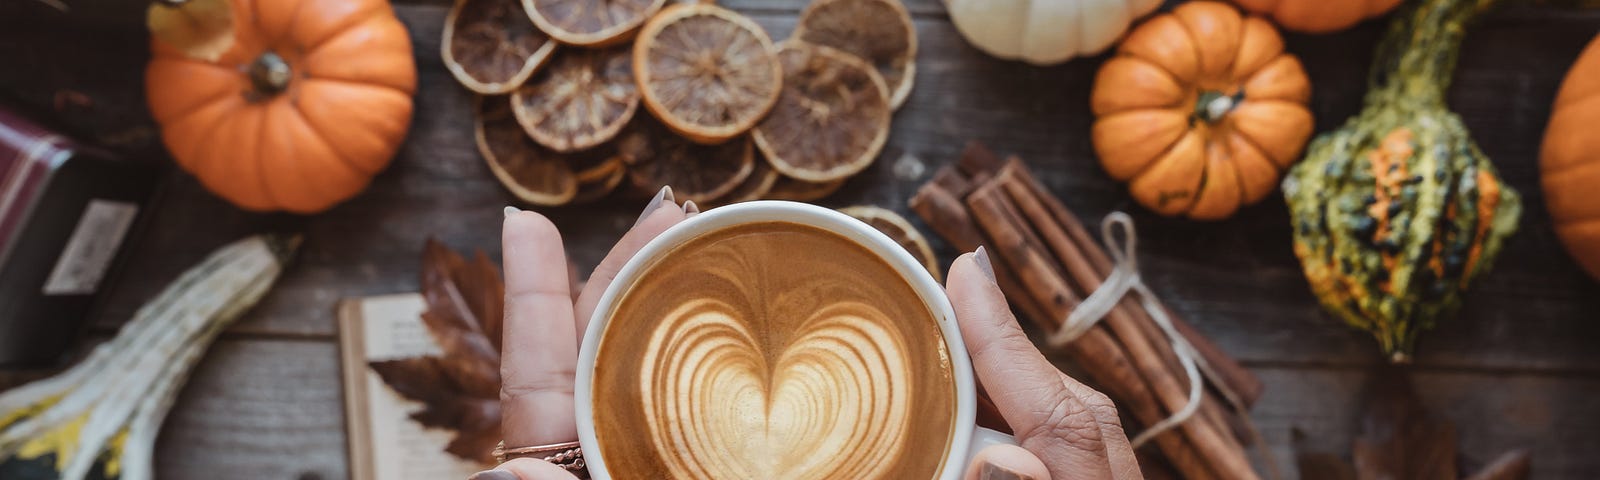 Hands half covered by the sleeves of a white jumper, cradle a mug of coffee topped with a heart pattern over a book sitting on a wooden table. An autumn theme is presented on the tabletop including pumpkins, chestnuts, preserved orange slices, and courgettes.